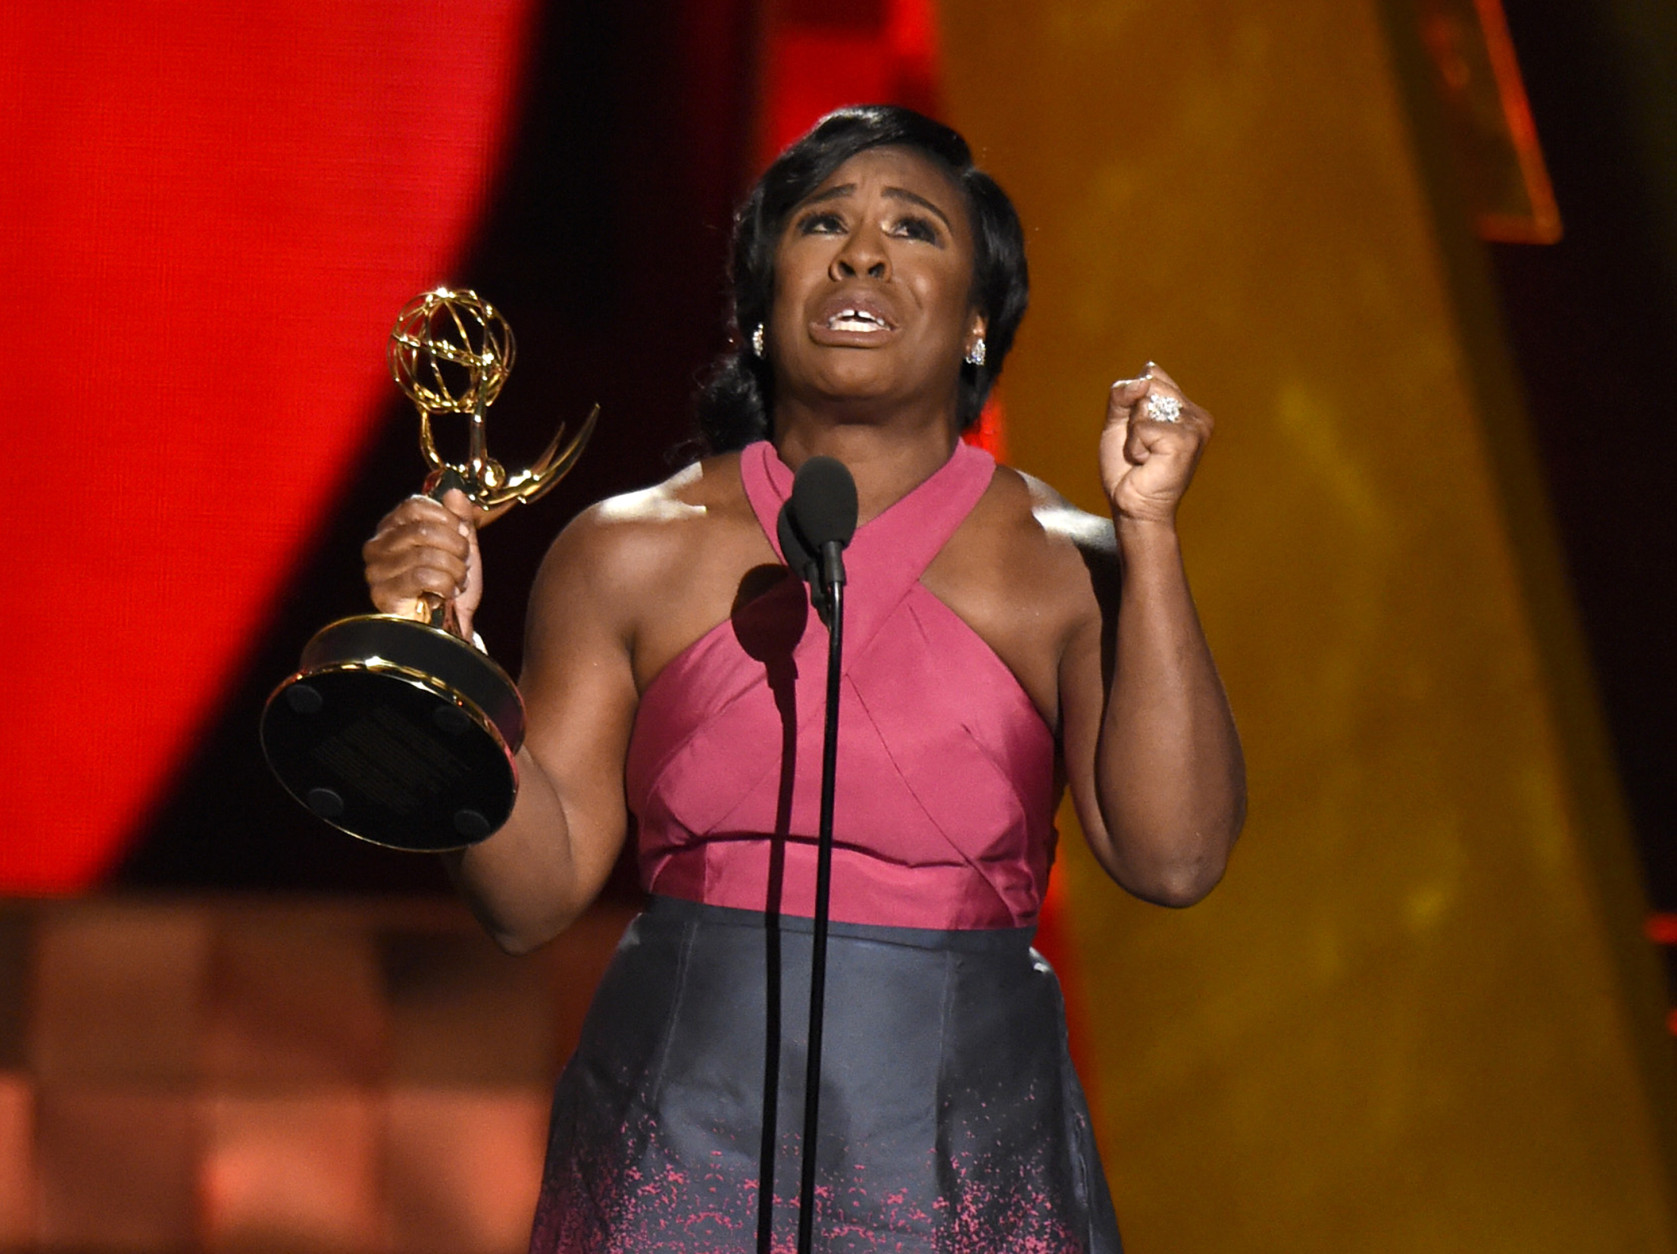 Uzo Aduba accepts the award for outstanding supporting actress in a drama series for Orange Is The New Black at the 67th Primetime Emmy Awards on Sunday, Sept. 20, 2015, at the Microsoft Theater in Los Angeles. (Photo by Chris Pizzello/Invision/AP)